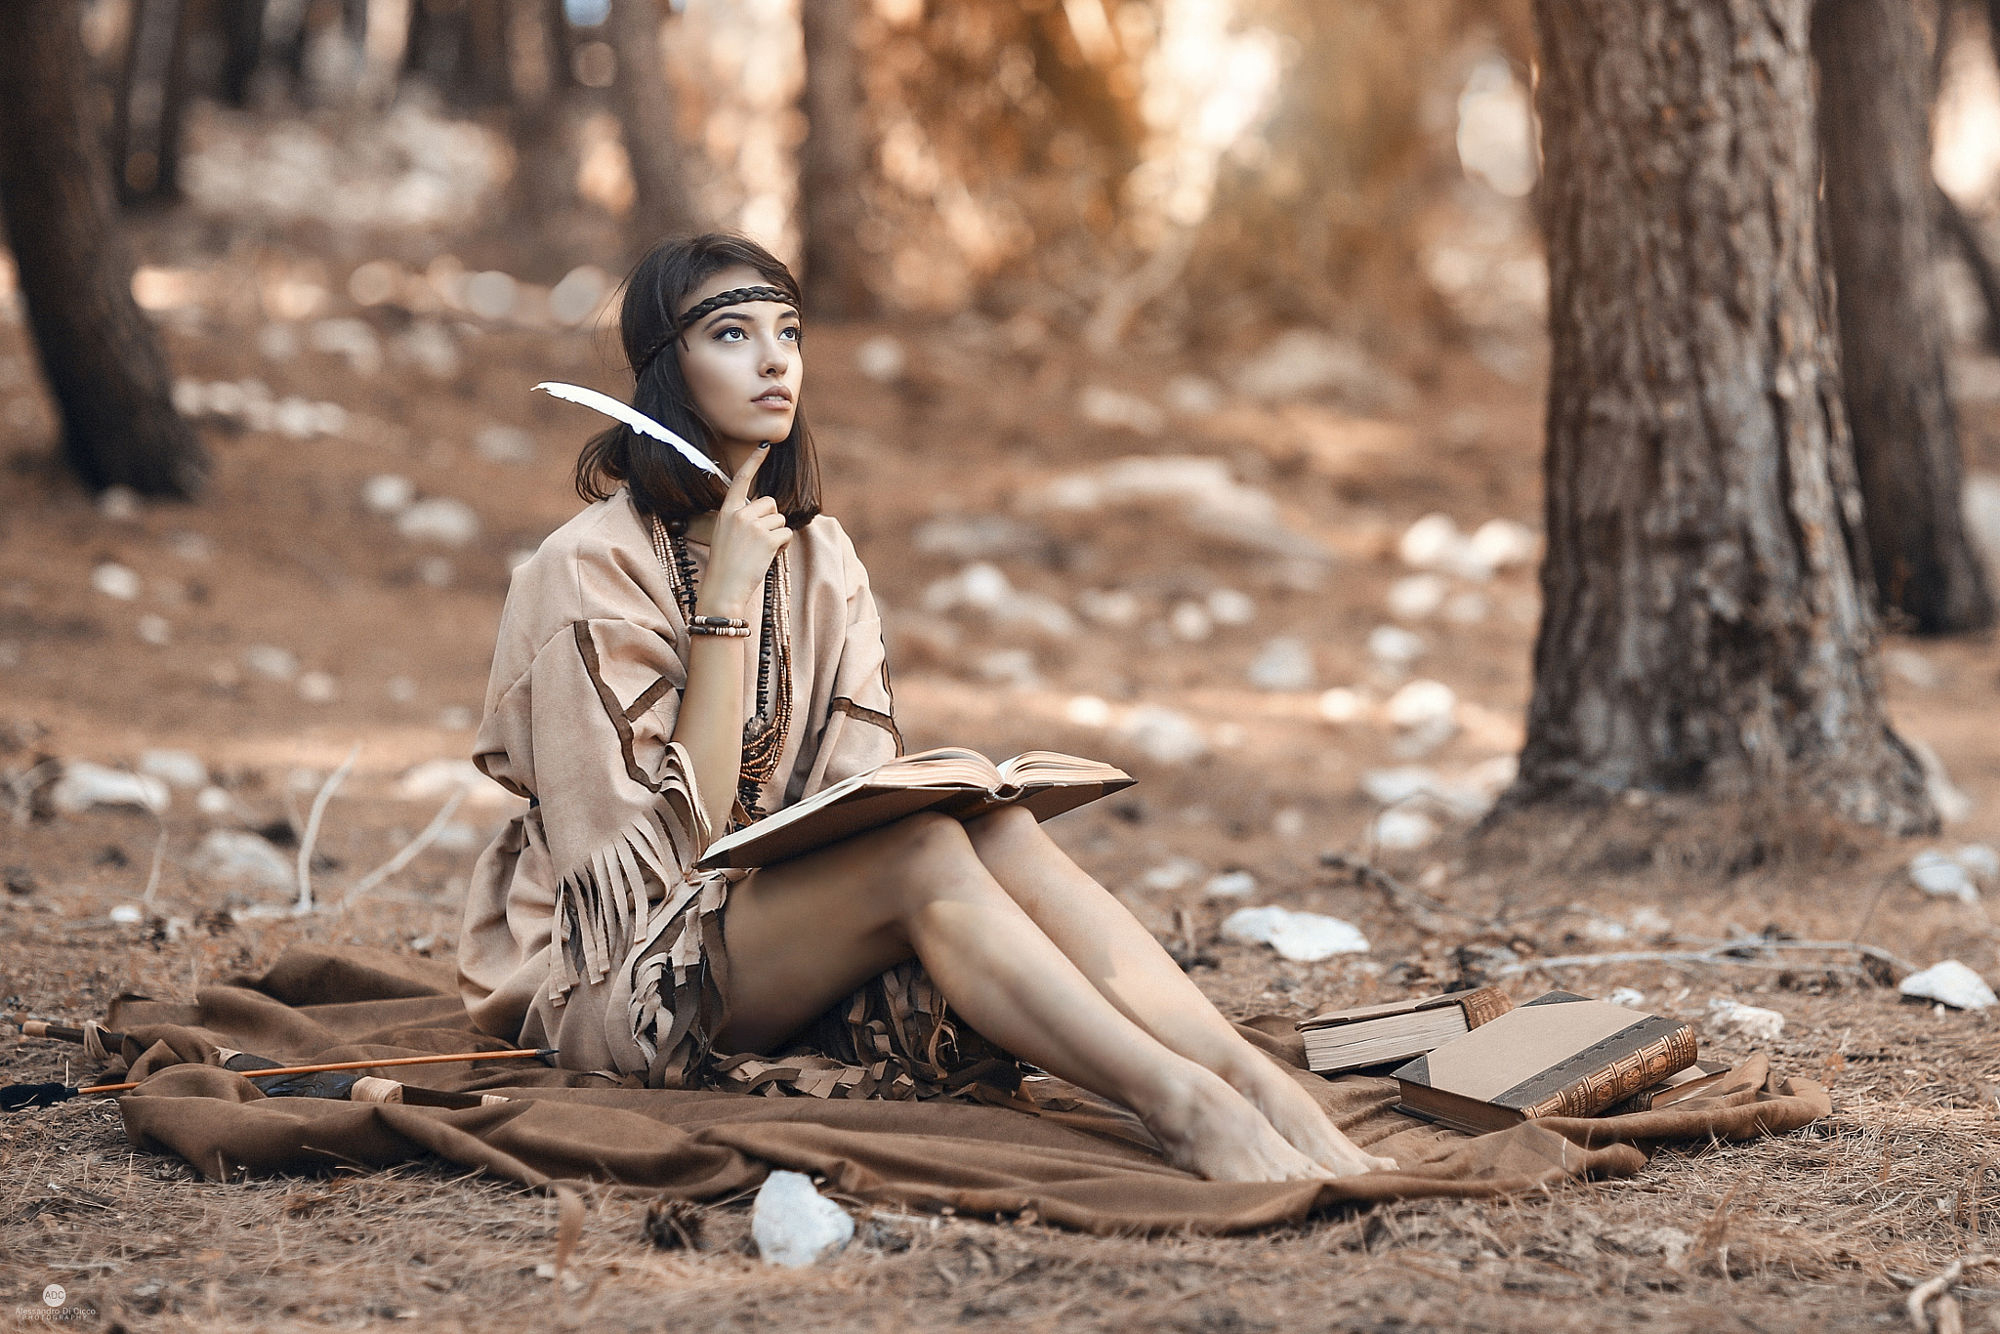 Alessandro Di Cicco Dark Hair Hairband Native American Clothing Feathers Books Writing Pencils Natur 2000x1334